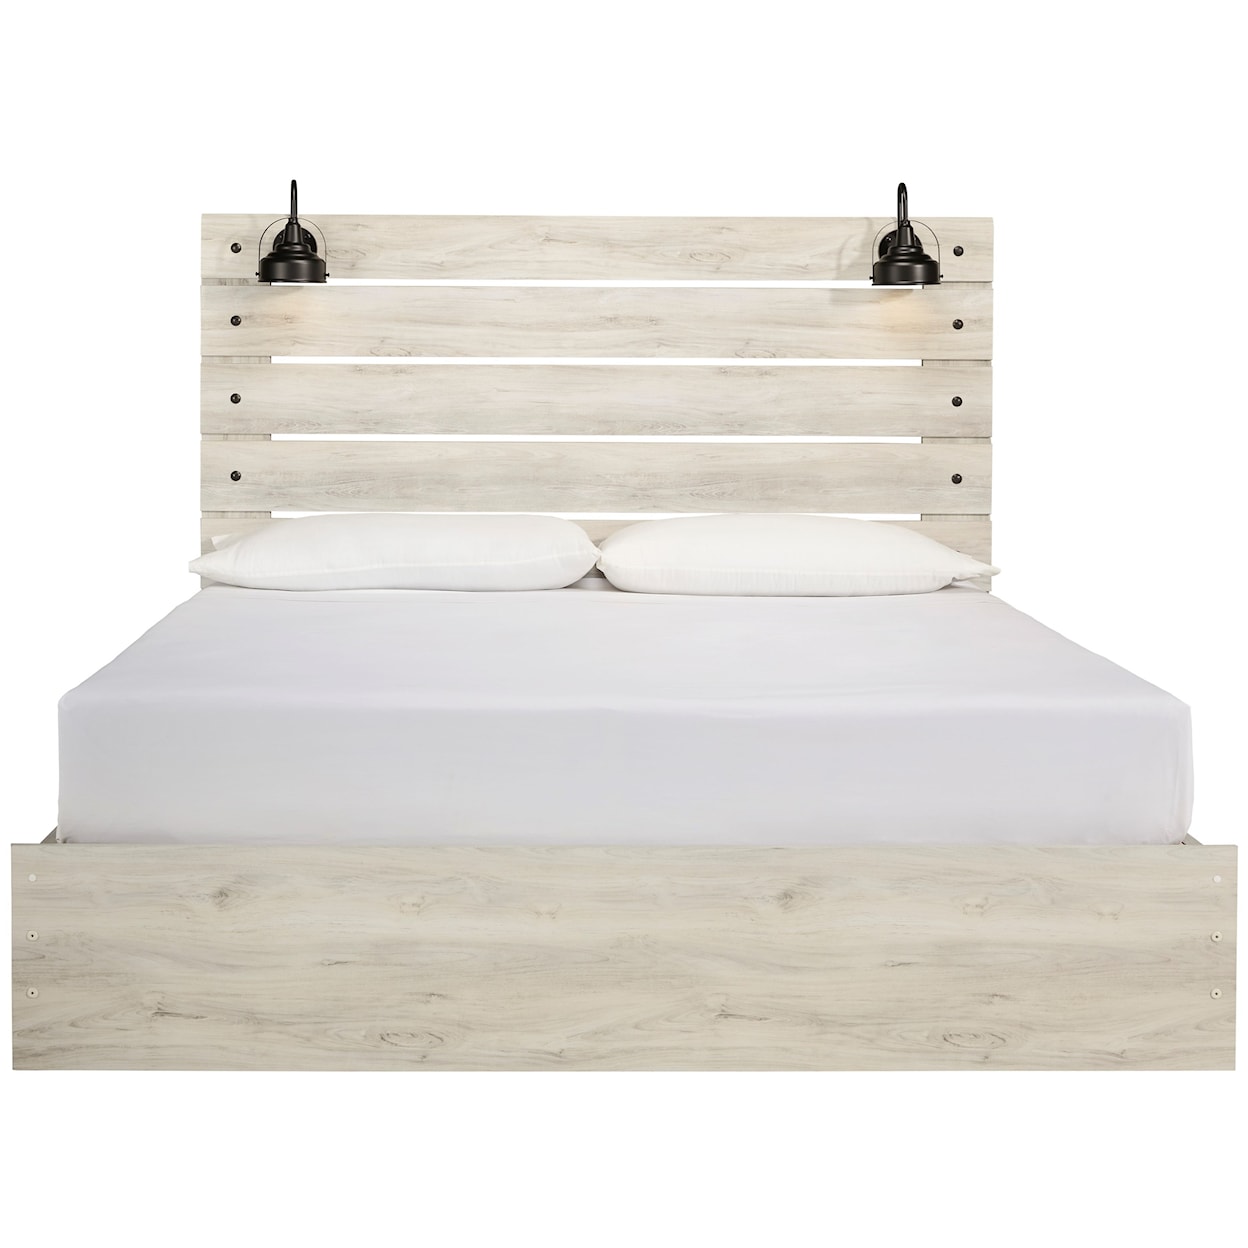 Signature Design by Ashley Cambeck King Storage Bed with 2 Drawers